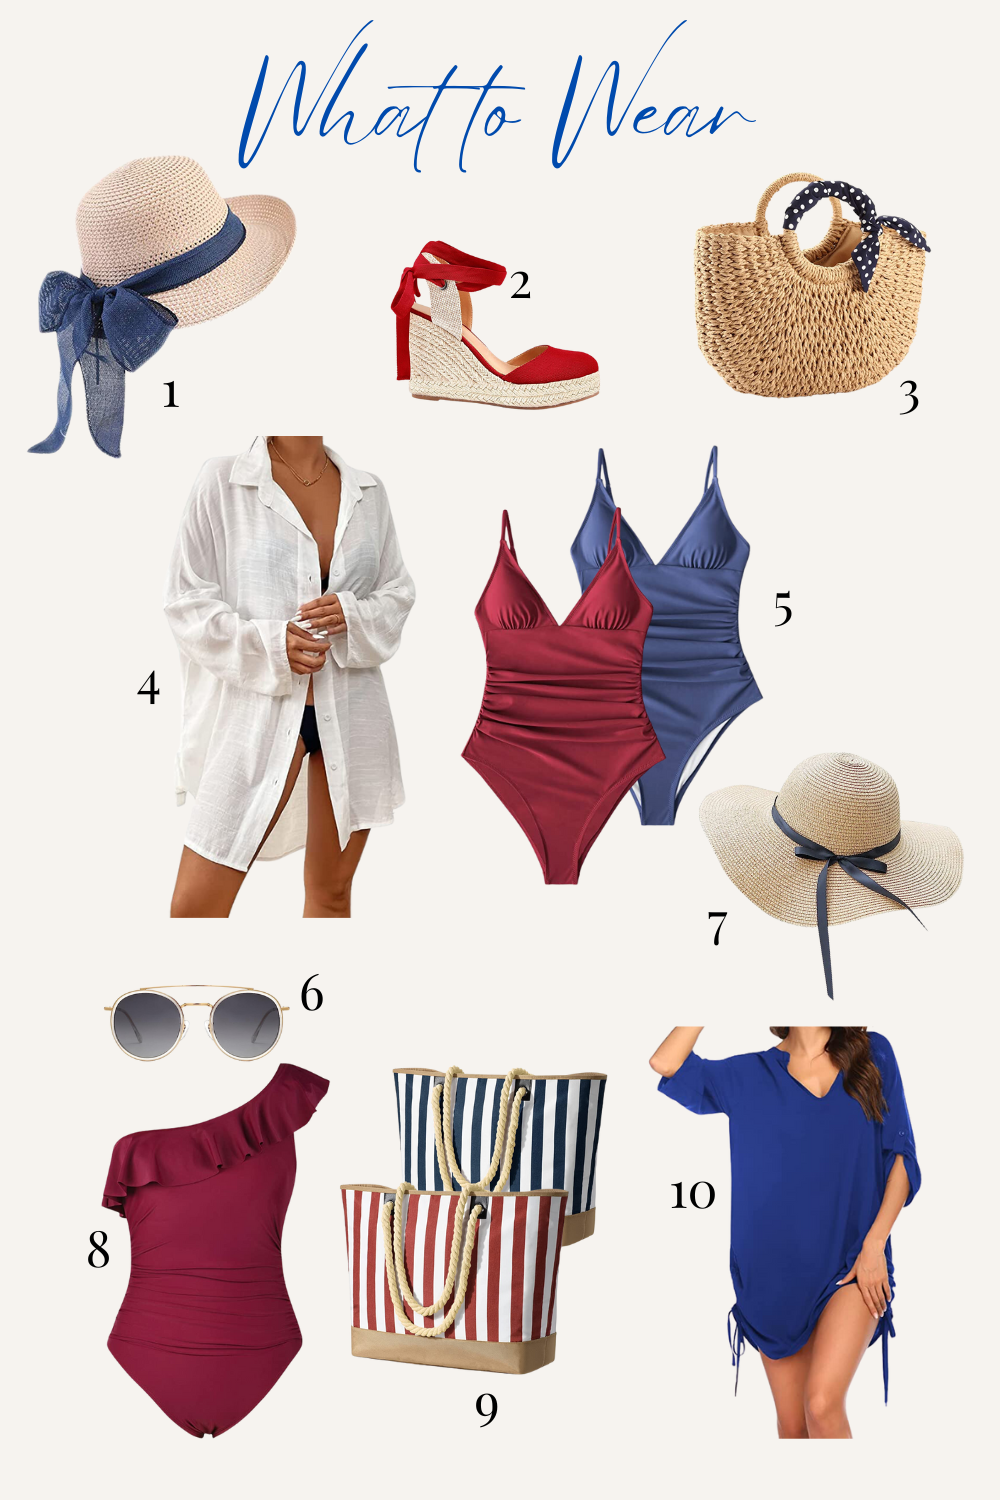 collage of patriotic pool wear, red and blue women's swimsuits, straw hats, red espadrilles, sunglasses, blue and white coverups, striped beach bags